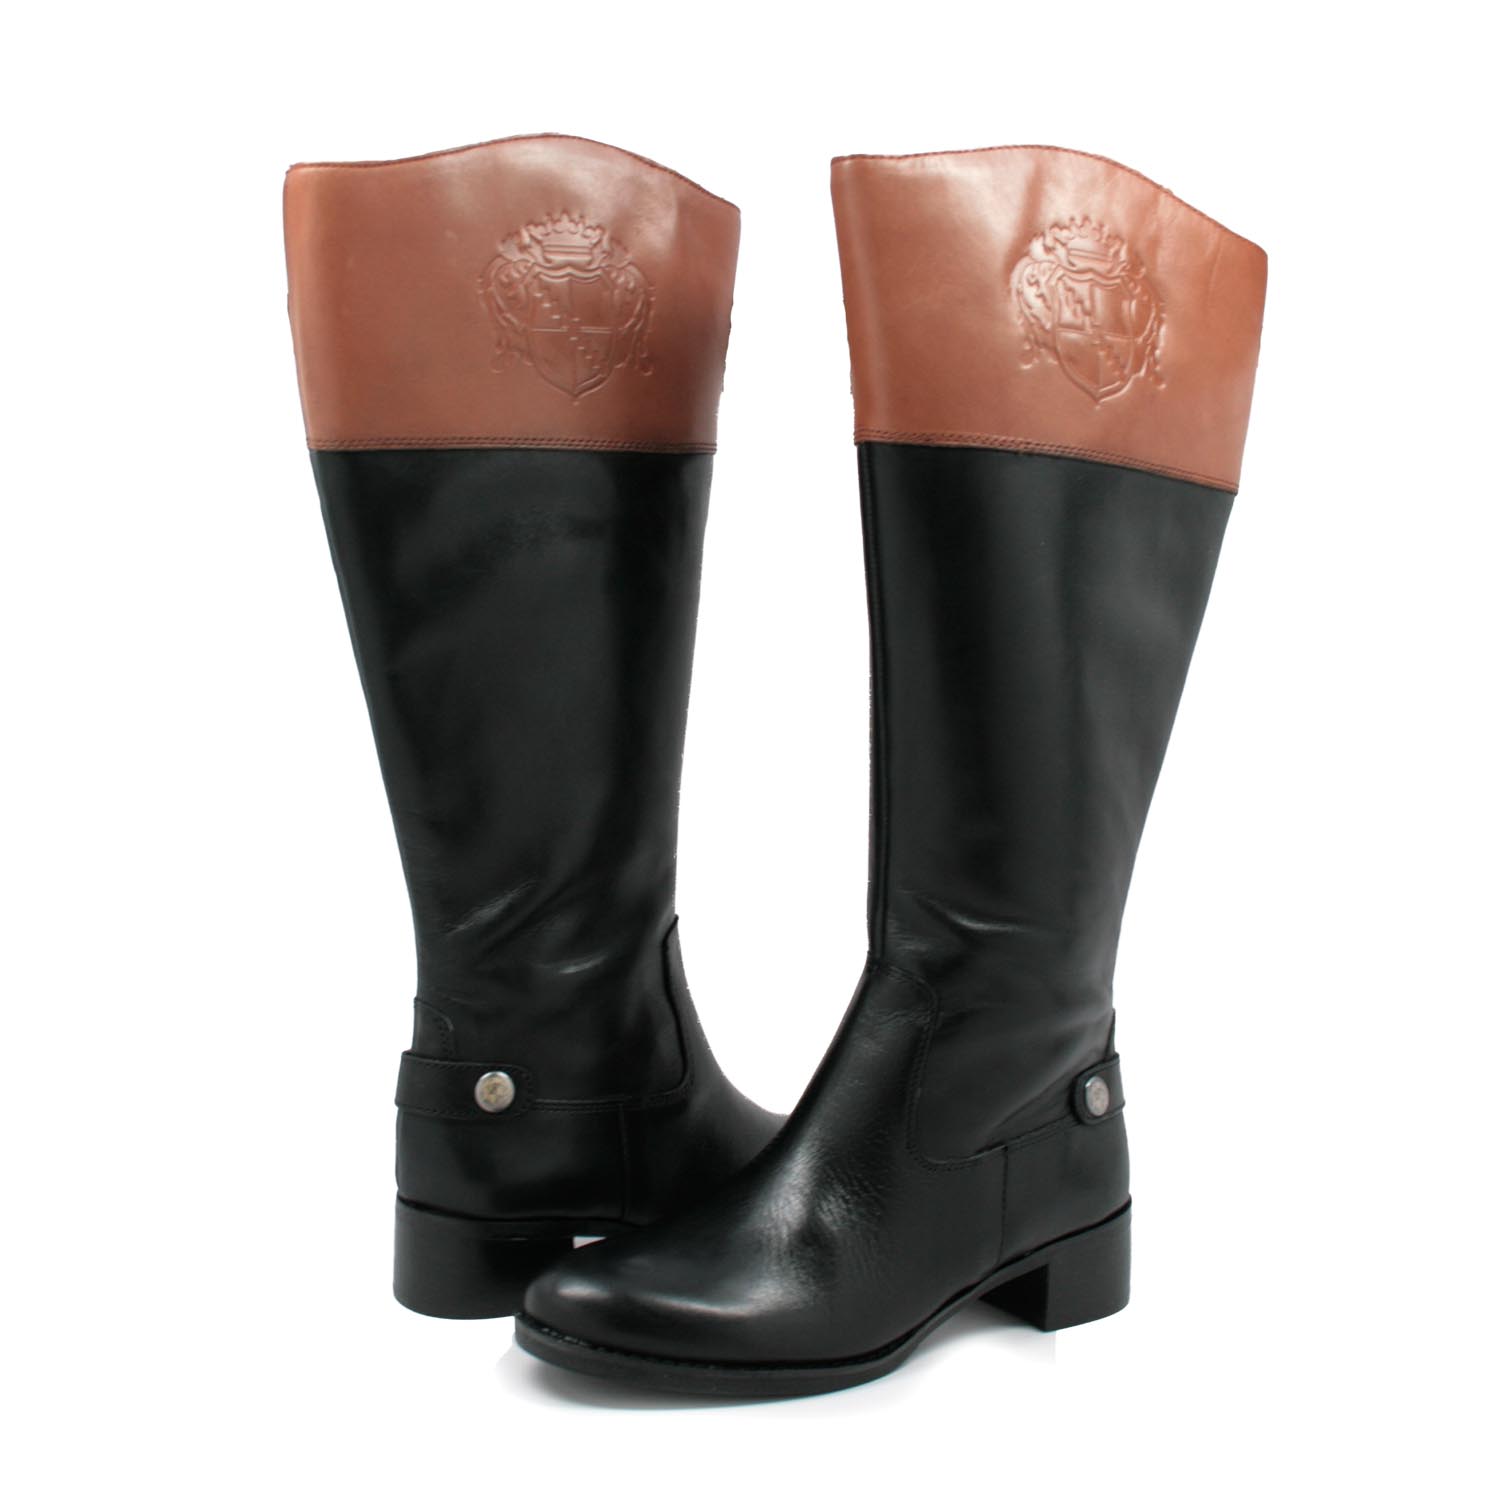 Buy > black and brown boots wide calf > in stock